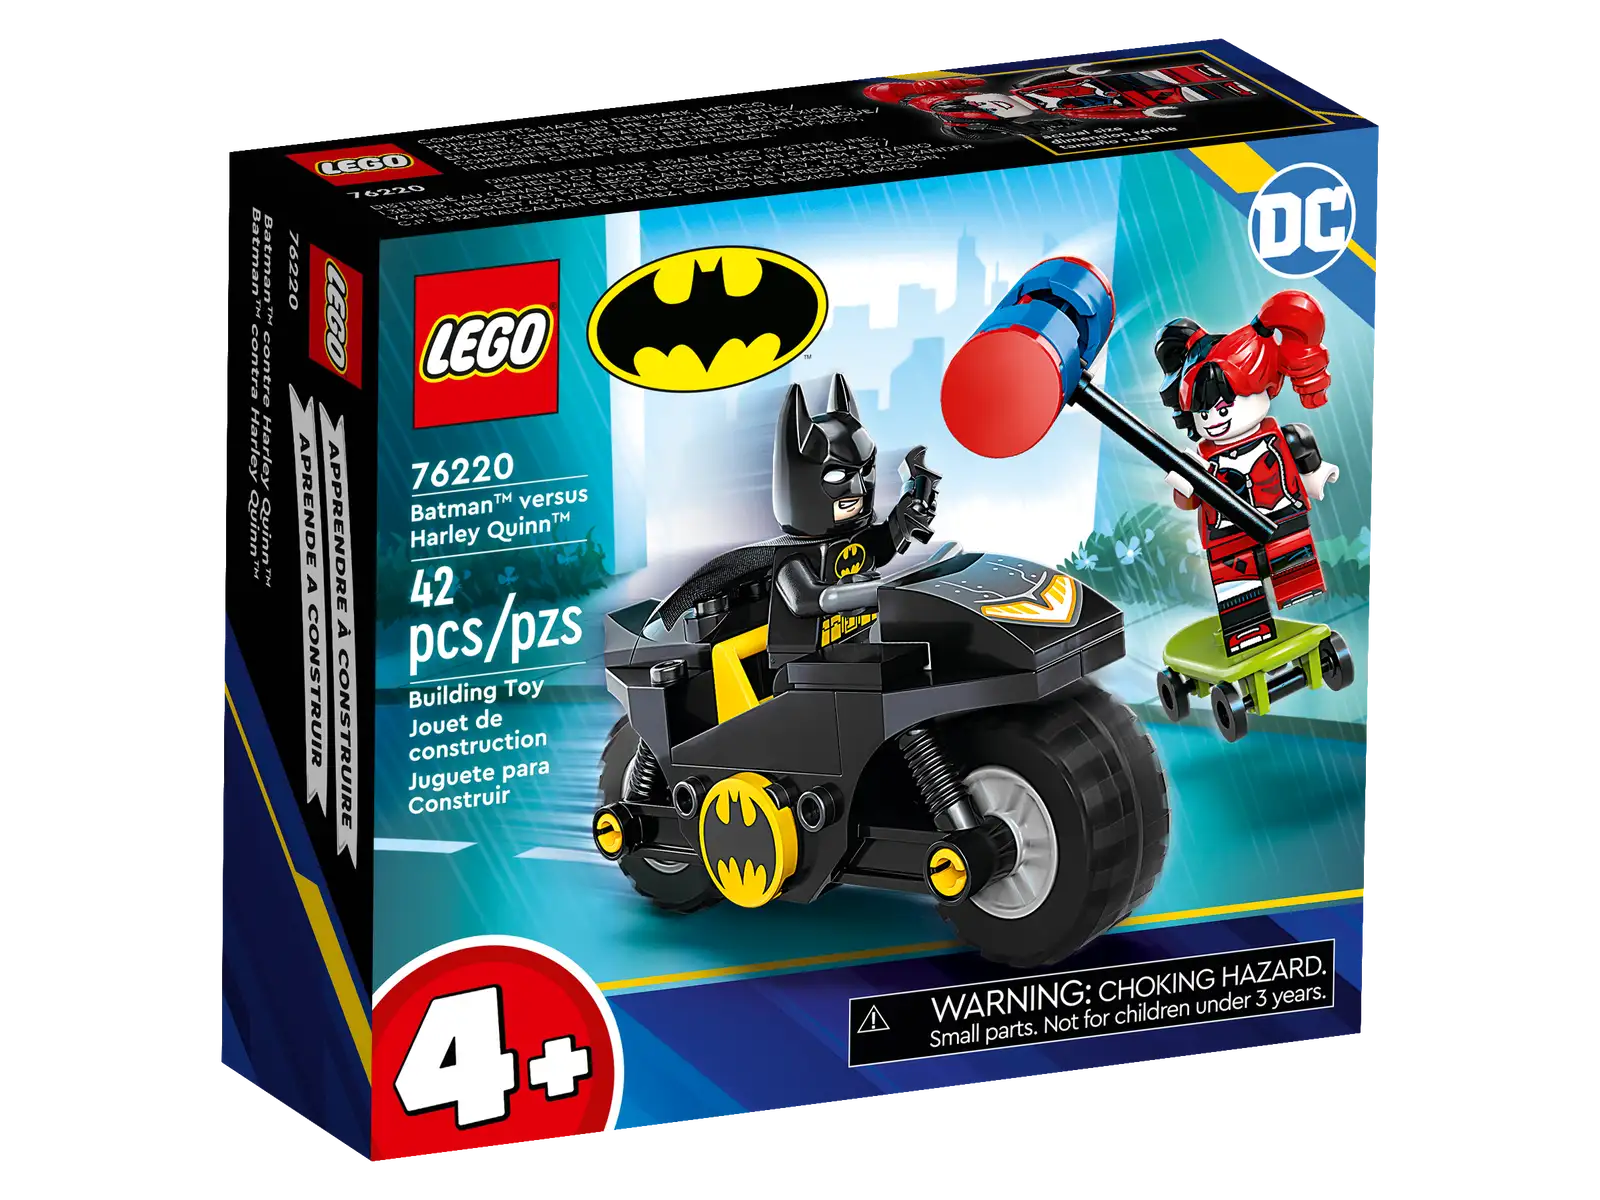 LEGO® DC Batman™ versus Harley Quinn™ (76220) features classic characters, cool vehicles and awesome accessories to engage kids aged 4 and up in shared, developmental play. The best start for young superheroes This action-on-wheels playset features 2 popular characters from the DC Super Hero movies: Batman riding his powerful Batcycle™ and Harley Quinn riding her skateboard, with an oversized mallet in her hand. LEGO 4+ sets are packed with engaging details to give youngsters the best play experience. Inside the box, each bag of bricks contains a complete model and character that kids can assemble for play right away. A large motorcycle Starter Brick is included to kick-start the construction, and intuitive instructions are provided in the form of a colorful picture-story guide. Great fun for families 4+ sets are the perfect way for adults to share the building fun with youngsters, whether they are a seasoned LEGO fan or are experiencing LEGO bricks for the first time. Super Hero fun for kids aged 4 and up – LEGO® DC Batman™ versus Harley Quinn™ (76220) is packed with features designed especially with youngsters aged 4 and up in mind Iconic characters – Includes Batman™ with his Batcycle™ and Batarang™ and Harley Quinn™ with her skateboard, hammer and dynamite. A Starter Brick gets kids building and playing without delay Action-on-wheels – The Caped Crusader™ and the skateboarding Super Villain clash in endless imaginative Super Hero battles Gift for budding superheroes – This LEGO® 4+ set has a Starter Brick motorcycle chassis and simple building steps to strengthen essential developmental skills in kids aged 4 and up Portable fun – The Batcycle™ measures over 1.5 in. (3 cm) high, 3.5 in. (9 cm) long and 1.5 in. (4 cm) wide. Small enough for youngsters to pick up and play with, but big enough for epic adventures Inspire young minds – LEGO® 4+ sets introduce children to a wide universe of movie favorites, TV characters and everyday heroes Quality guaranteed – LEGO® components fulfill stringent industry quality standards to ensure they are consistent, compatible and connect and pull apart easily every time Safety assured – LEGO® components are dropped, heated, crushed, twisted and analyzed to make sure they satisfy rigorous global safety standards